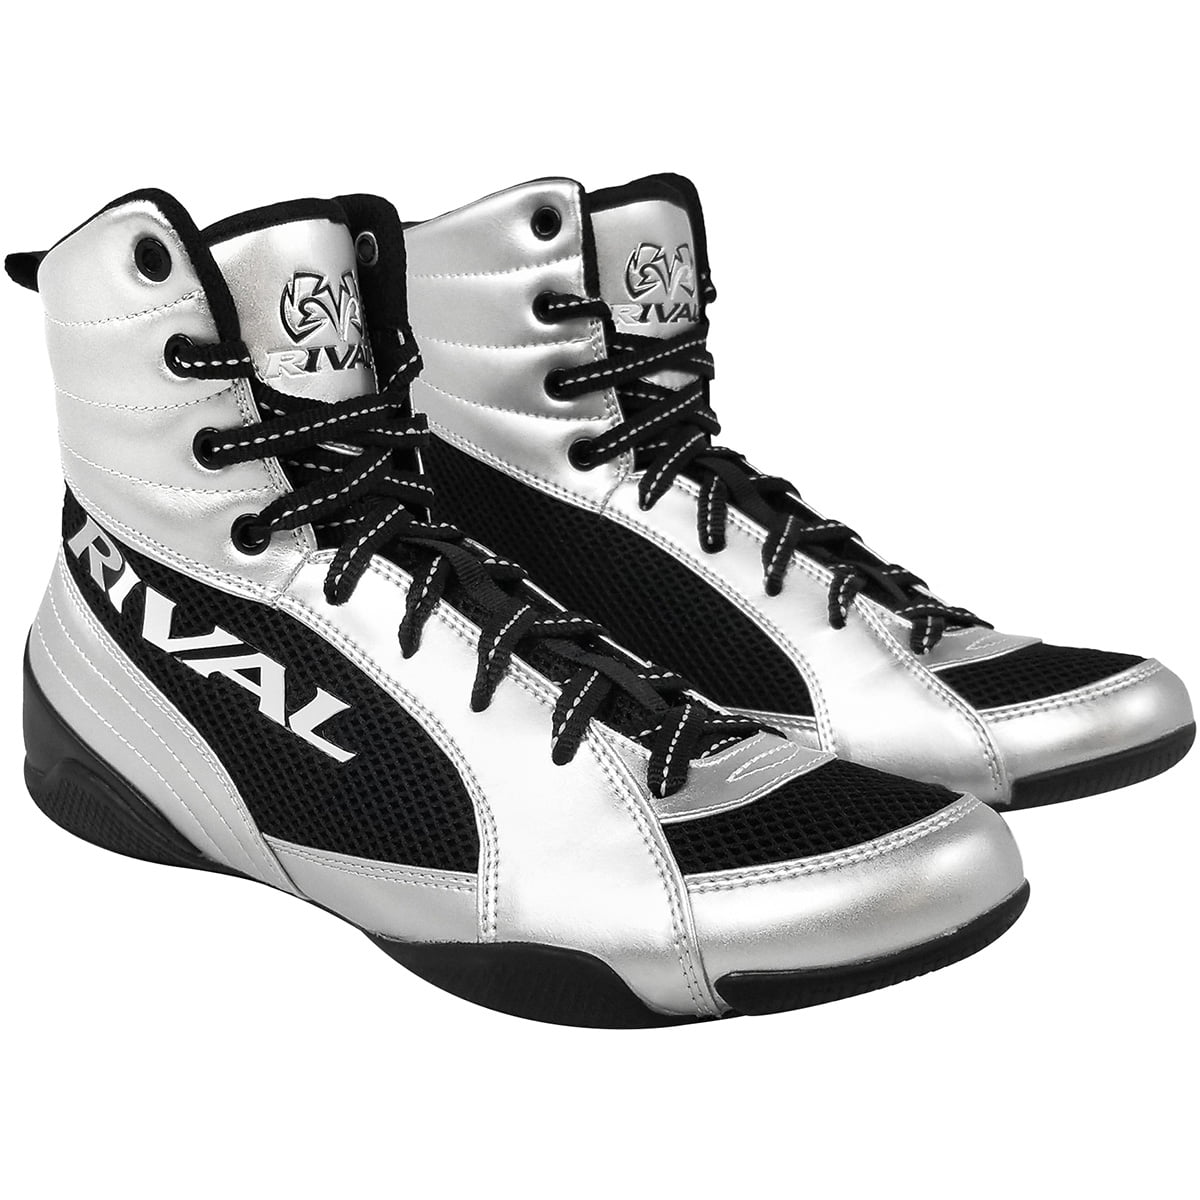 Boxing MMA Wrestling Shoes Trainers High Top Athletic Boots Martial Arts Unisex 